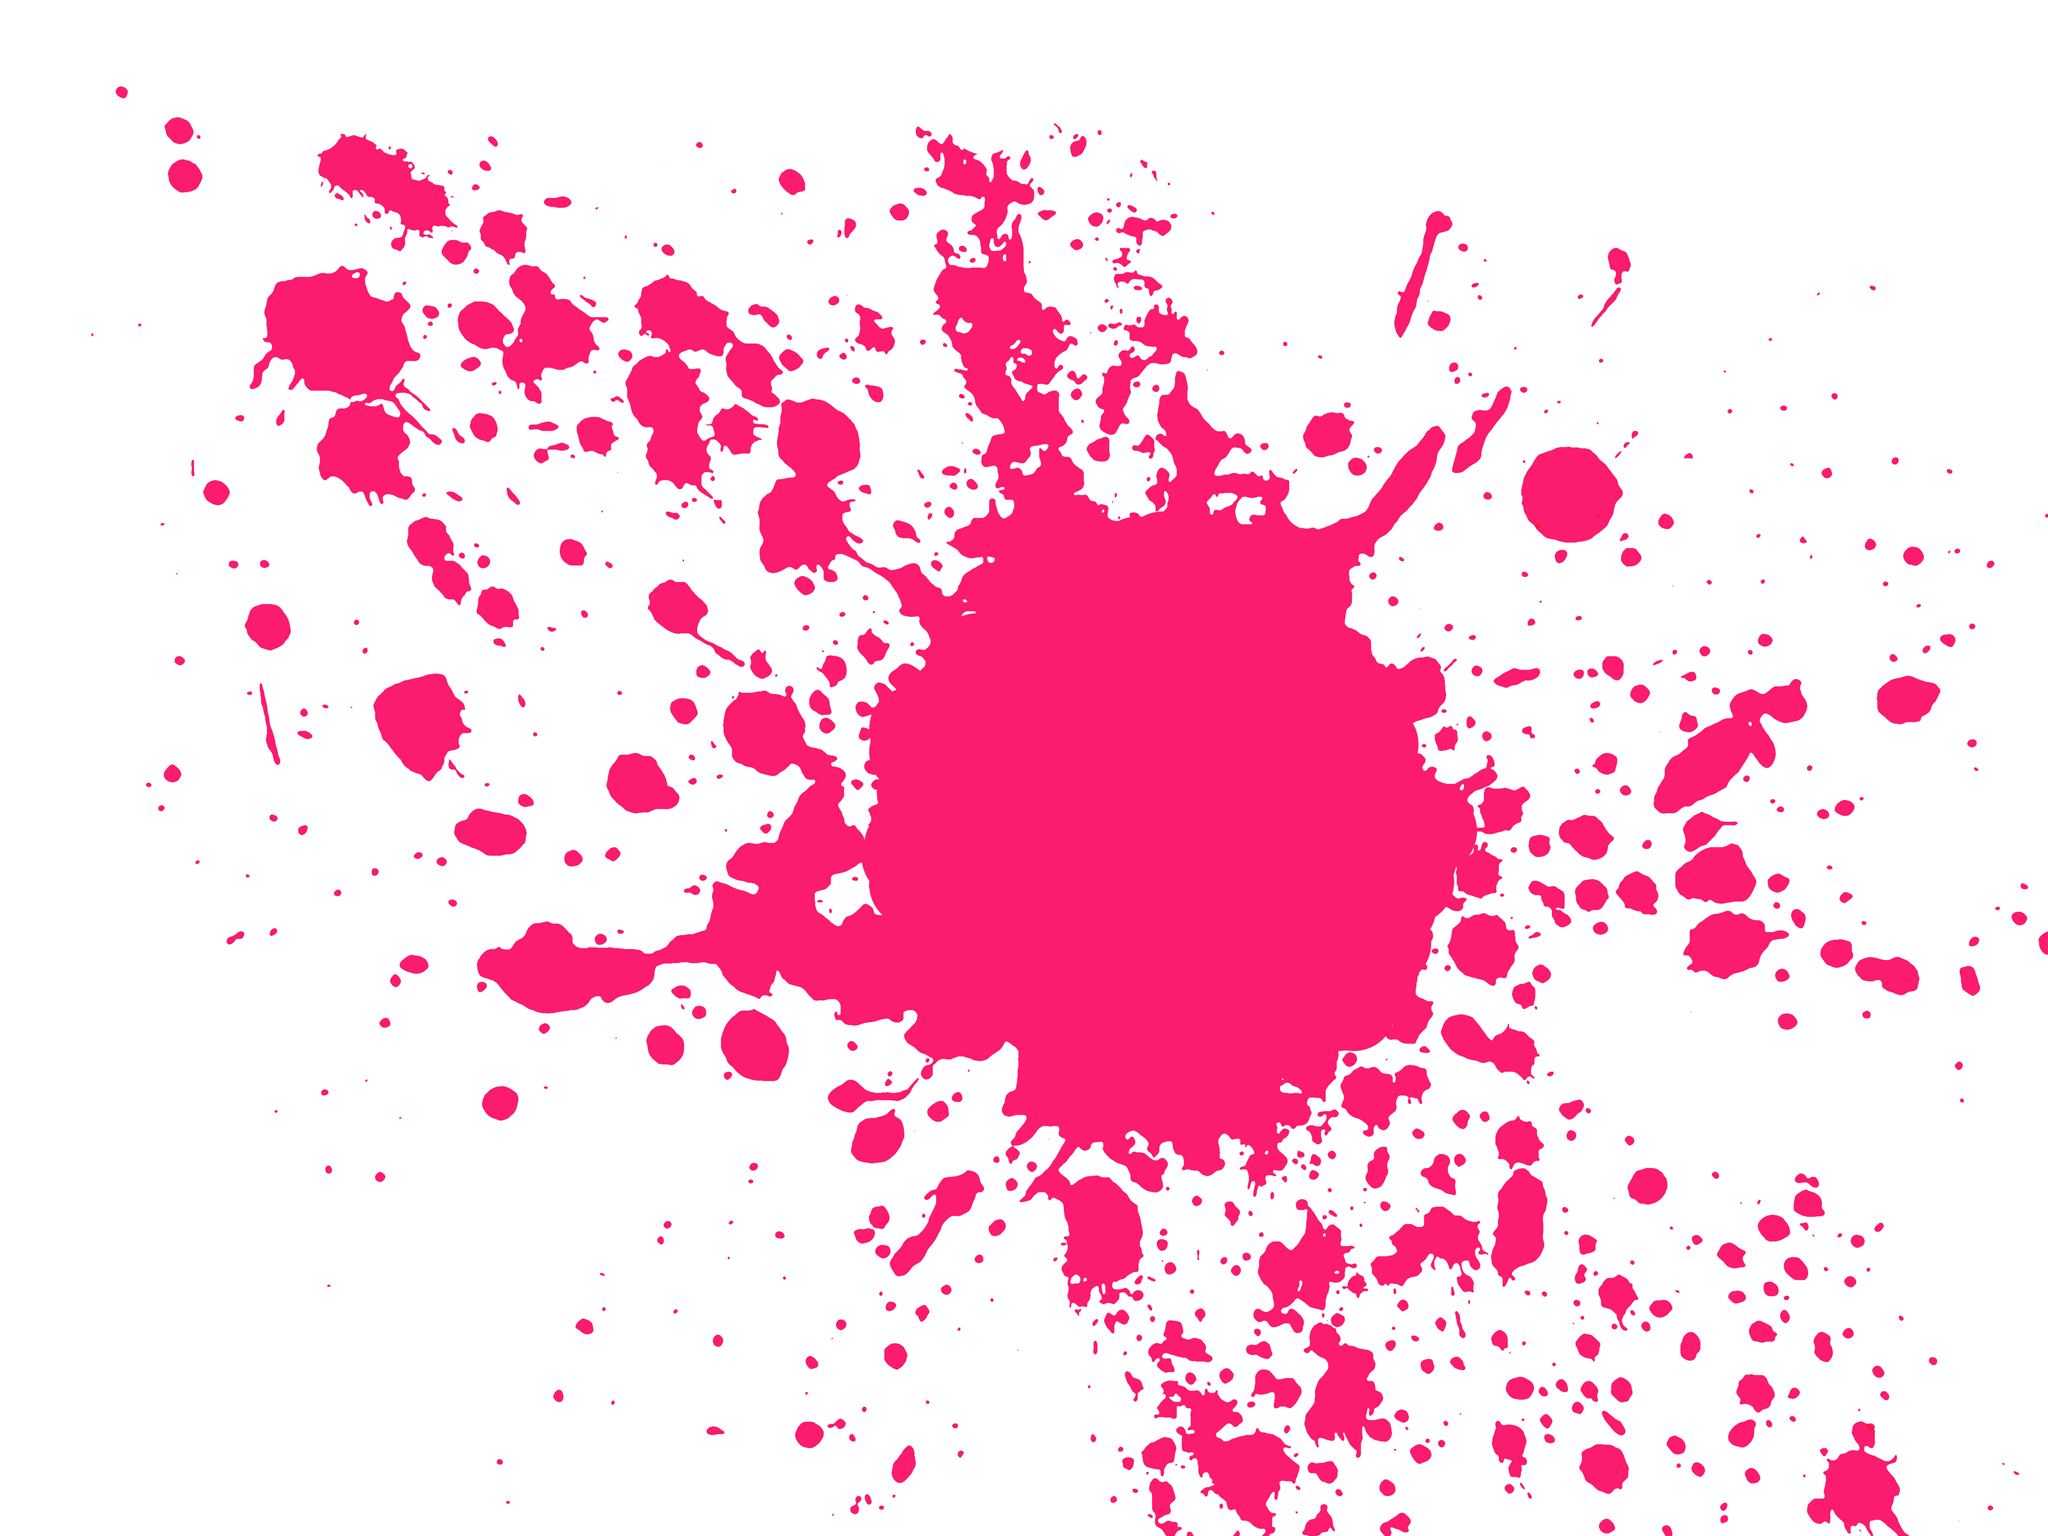 Paint splatter not after effects free download free after effects projects free download